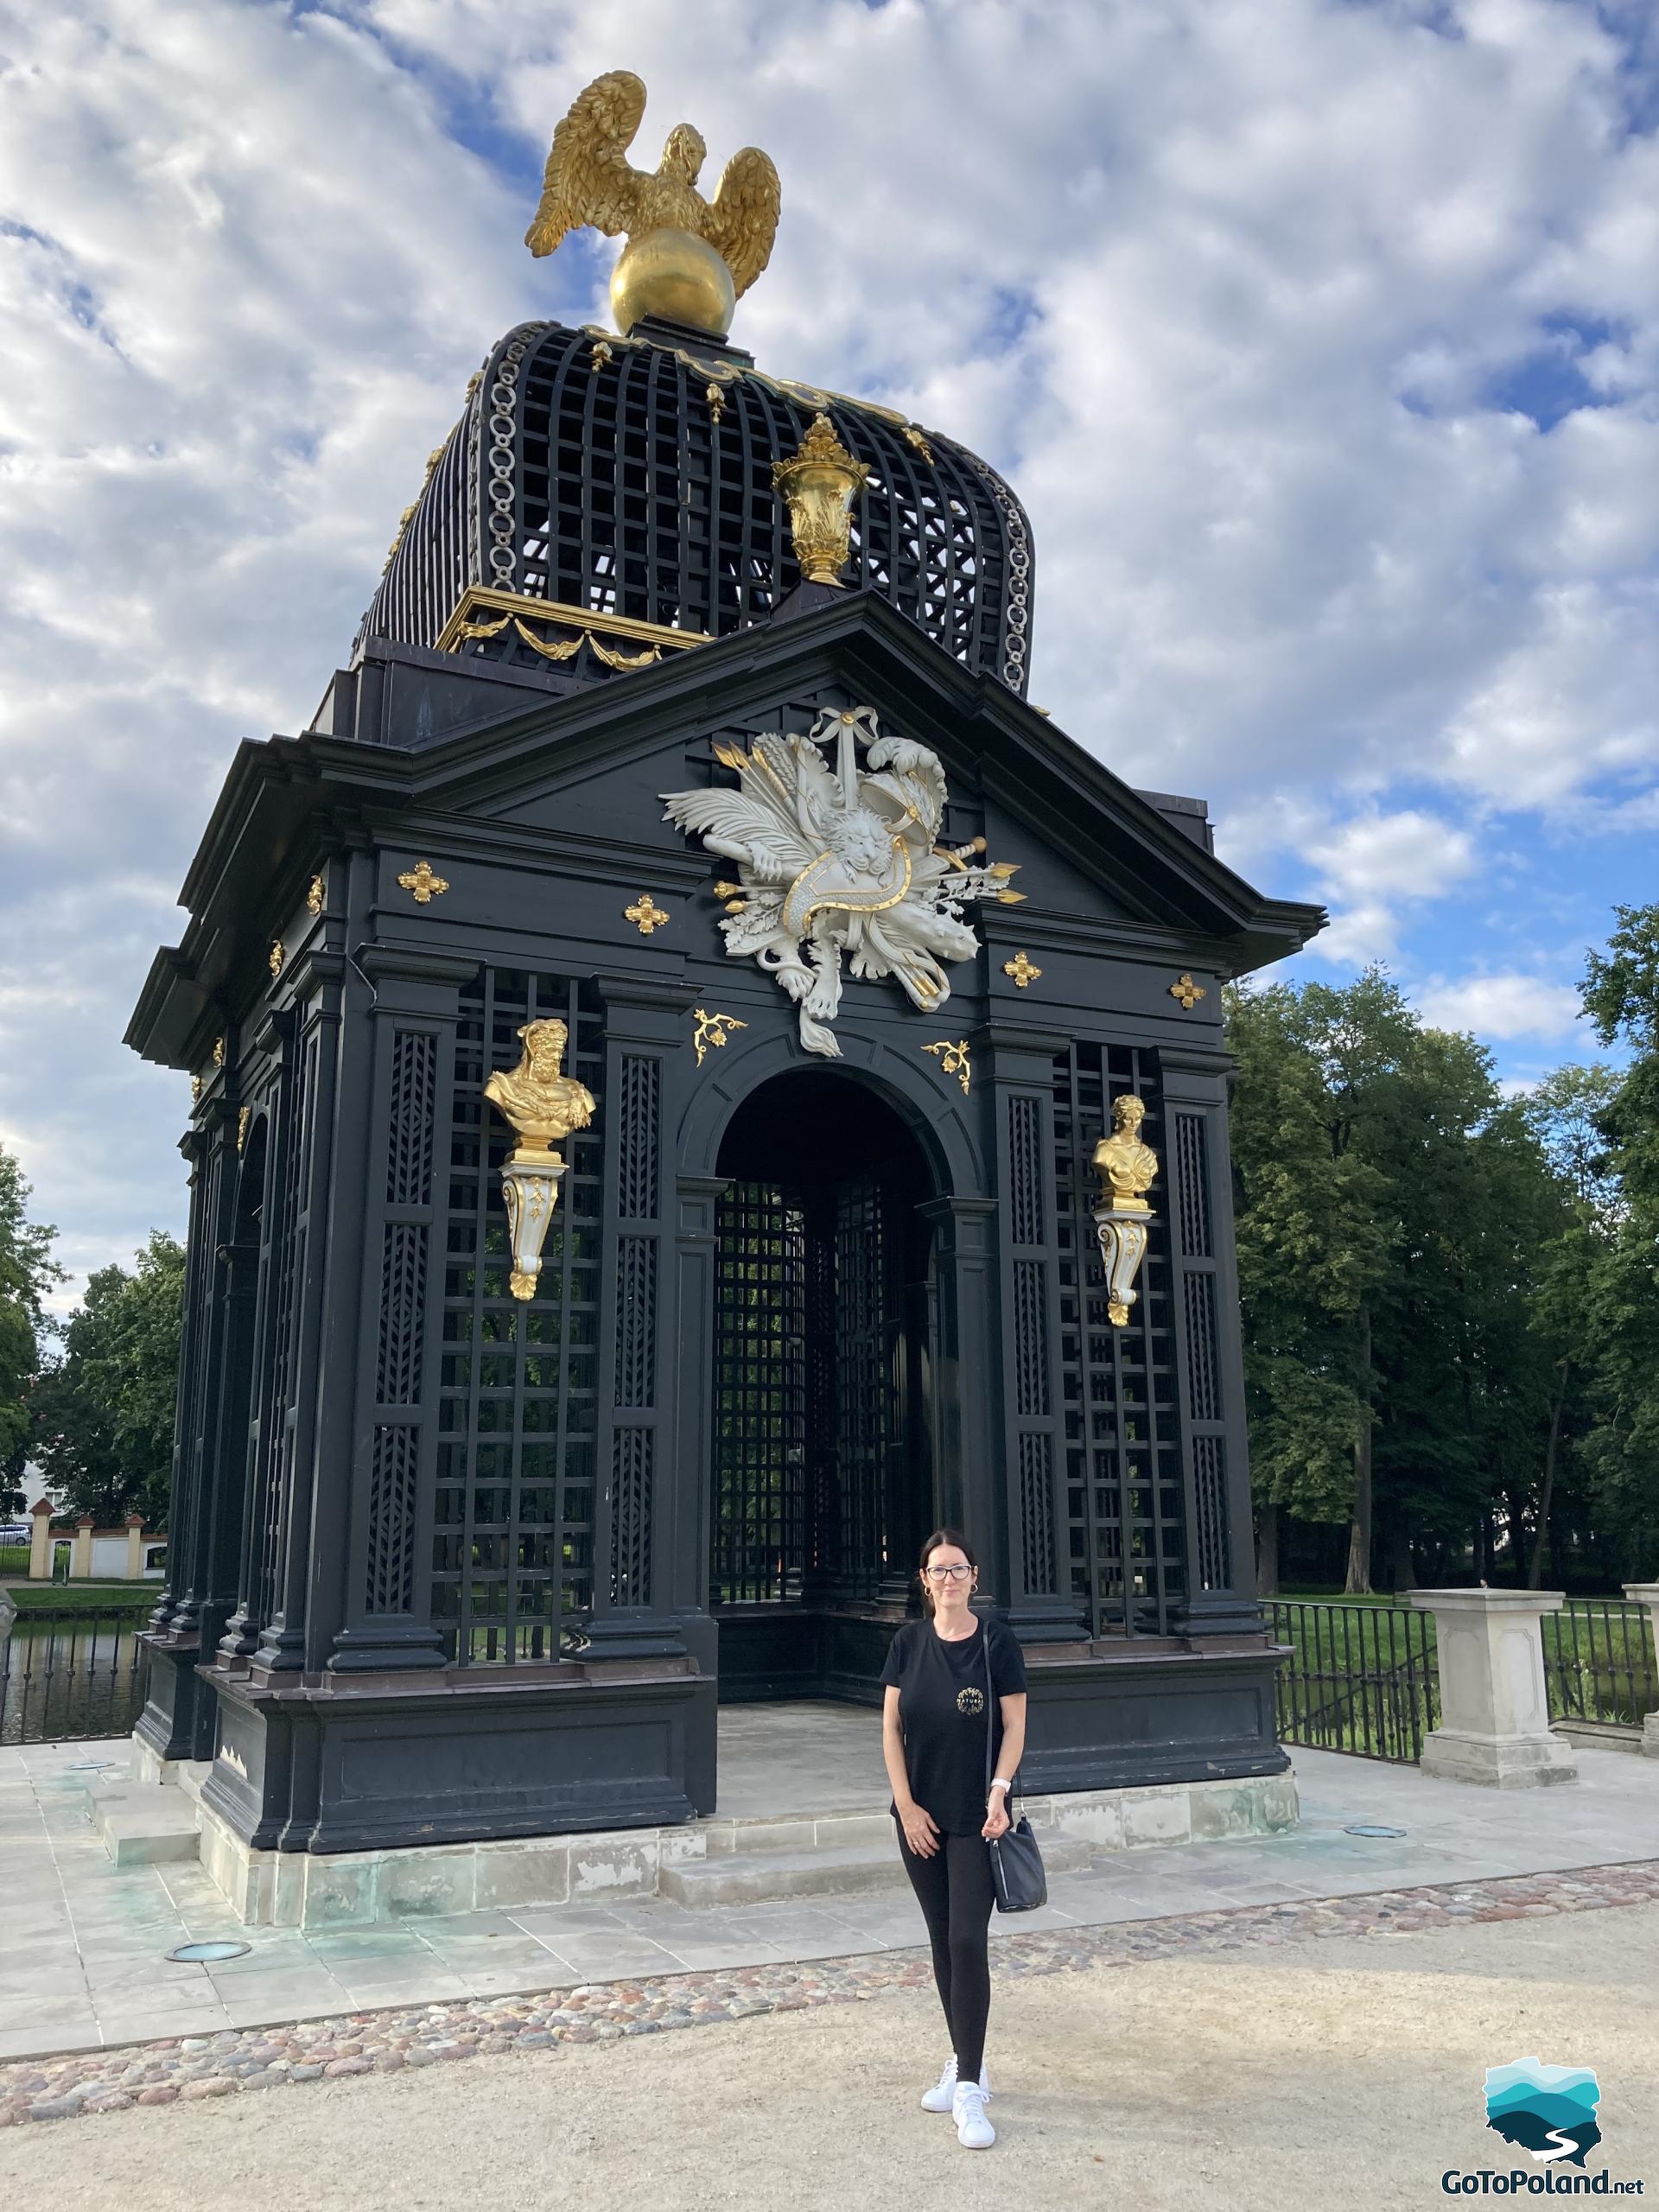 a black great gate with a gold statue of a bird on top, on the gate there are gold ornaments, a woman is standing in front of it 